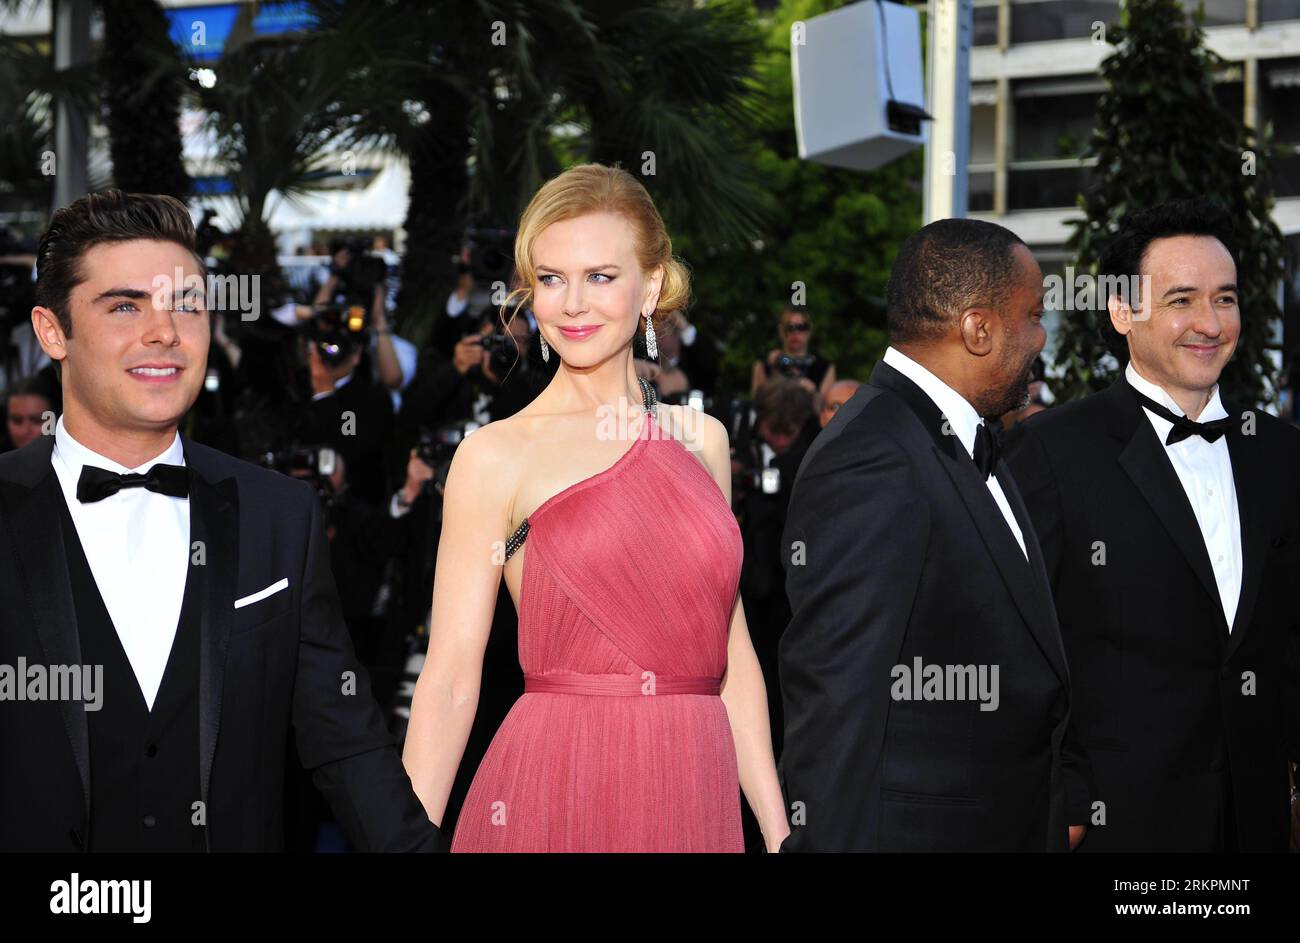 Bildnummer: 58027681  Datum: 24.05.2012  Copyright: imago/Xinhua (120524) -- CANNES, May 24, 2012 (Xinhua) -- (L to R) Cast members of The Paperboy , U.S. actor Zac Efron, Australian actress Nicole Kidman, U.S. director Lee Daniels and U.S. actor John Cusack arrive for its premiere at the 65th Cannes Film Festival in Cannes, southern France, May 24, 2012. (Xinhua/Ye Pingfan) FRANCE-CANNES-FILM FESTIVAL-PREMIERE-PAPERBOY PUBLICATIONxNOTxINxCHN Kultur Entertainment People Film 65. Internationale Filmfestspiele Cannes Filmpremiere Premiere x0x xub 2012 quer premiumd      58027681 Date 24 05 2012 Stock Photo